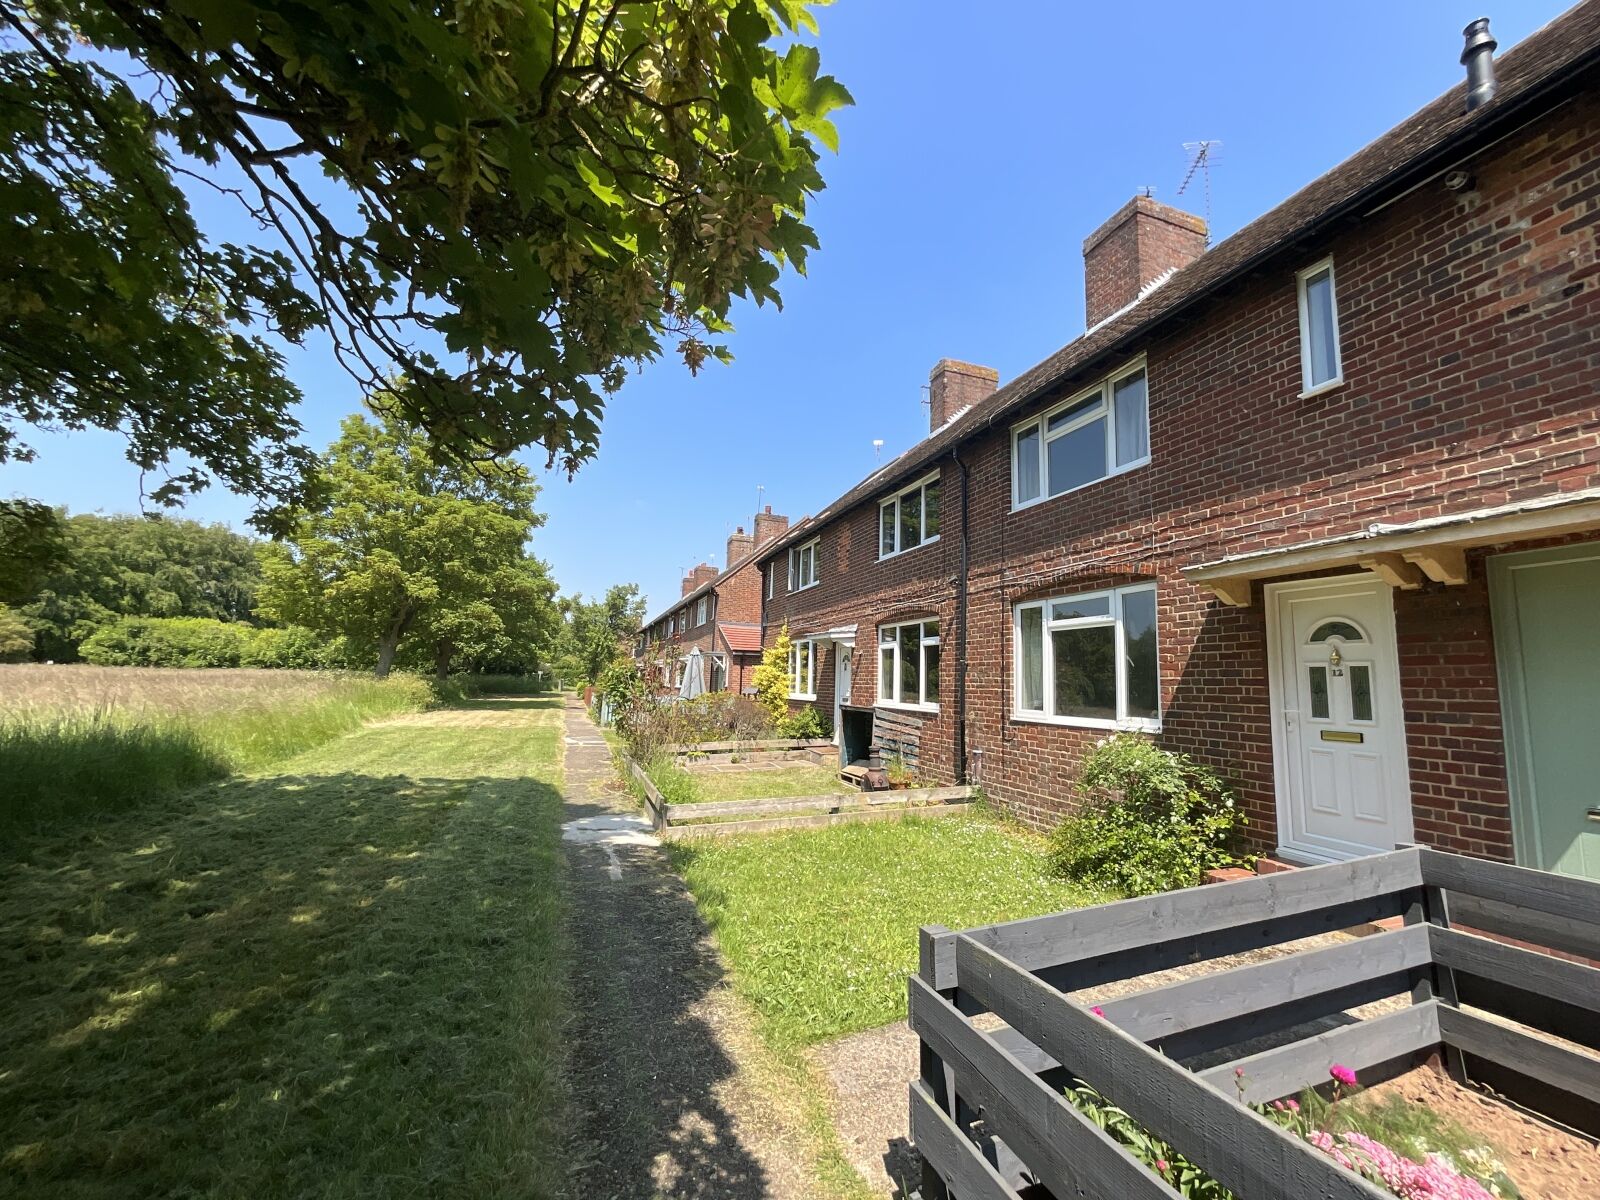 3 bedroom mid terraced house for sale North Drive, Harwell, OX11, main image